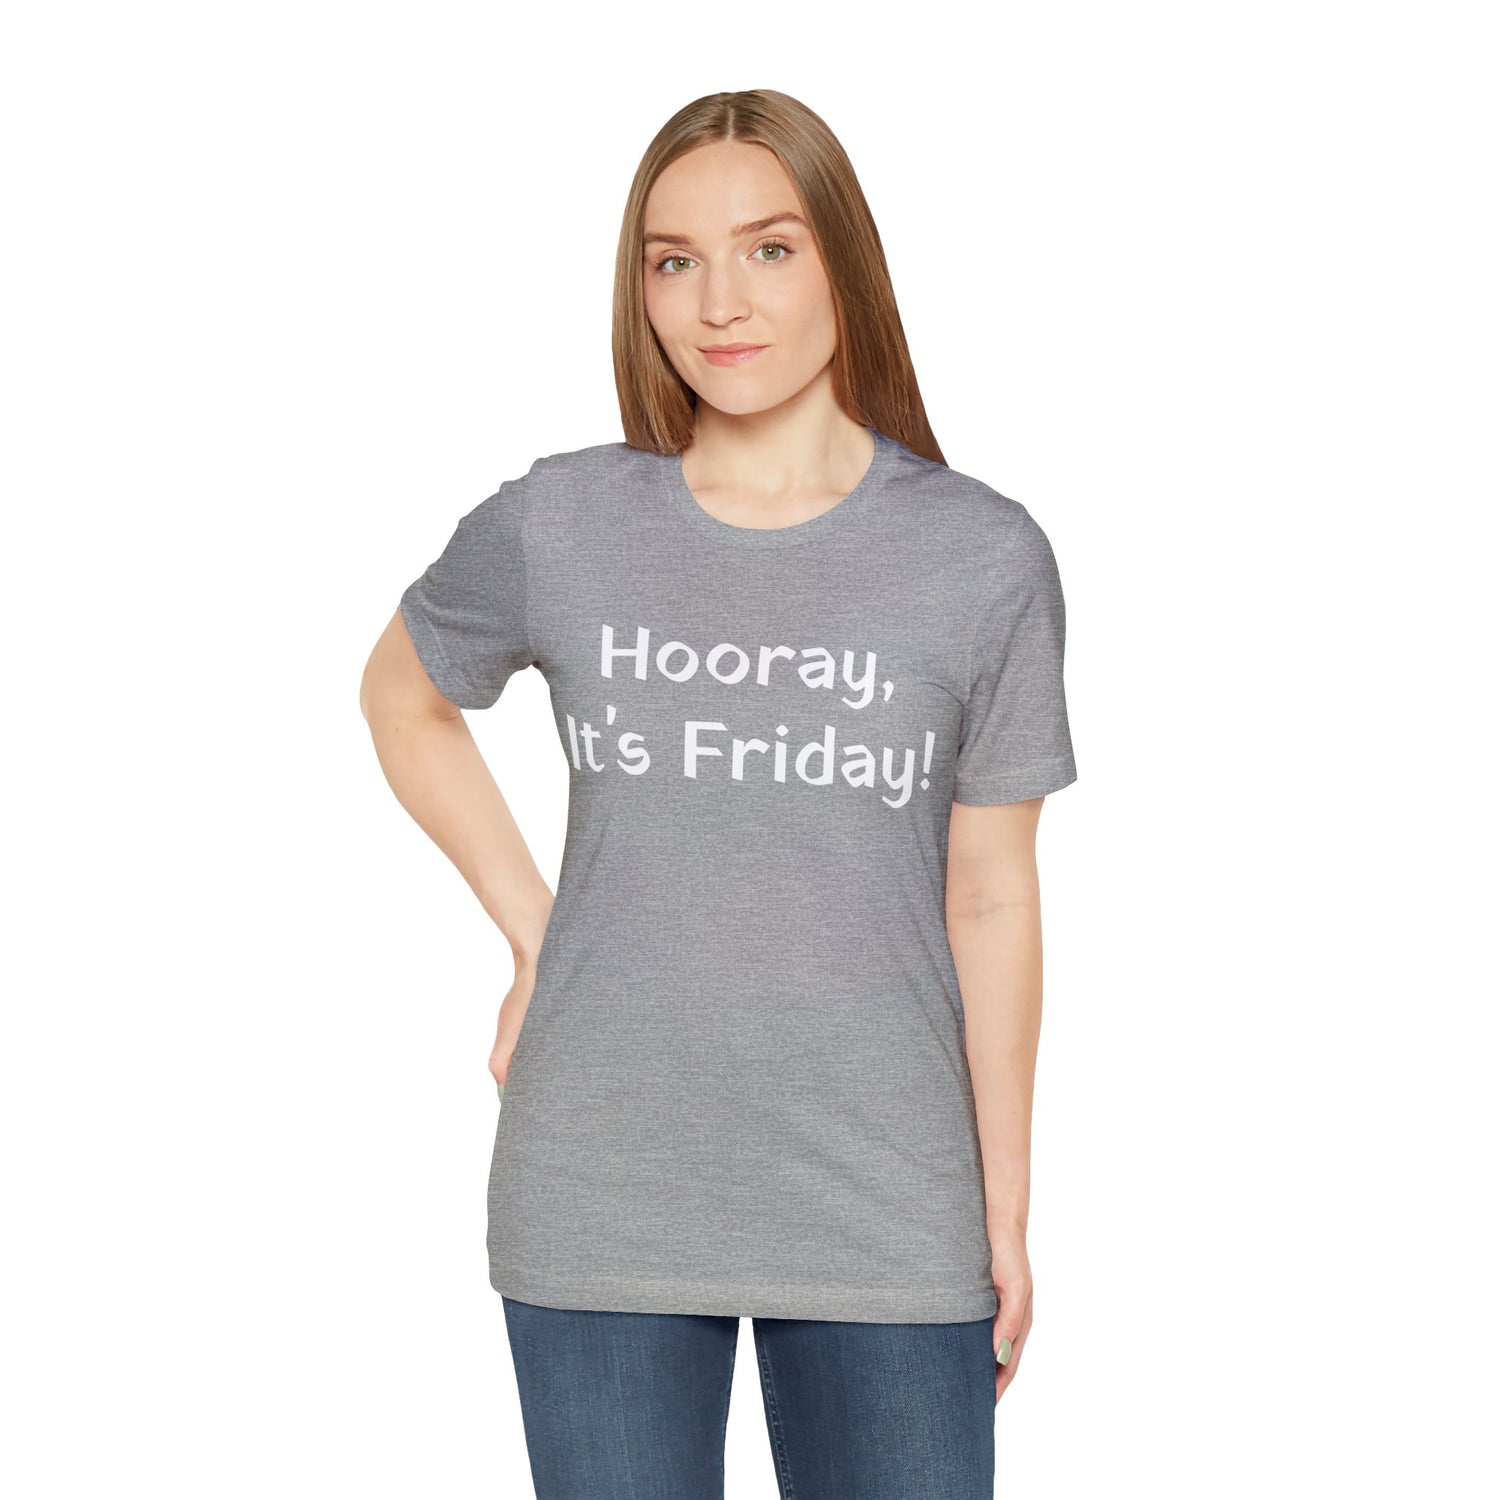 Casual Fit Celebrate Fridays with Petrova Designs Celebration and Anticipation Connect with Others Cotton Crew neck Downtime Embrace the Weekend End of the Workweek Friday Celebration Friday Enthusiasm Friday Excitement Friday Fashion Friday Fever Friday Mood Friday Spirit Fun and Lighthearted Hooray It's Friday Movie Marathon Night Out Petrova Designs Positive Energy Relax and Unwind T-shirts TGIF Unisex Weekend Vibes Weekend Wardrobe